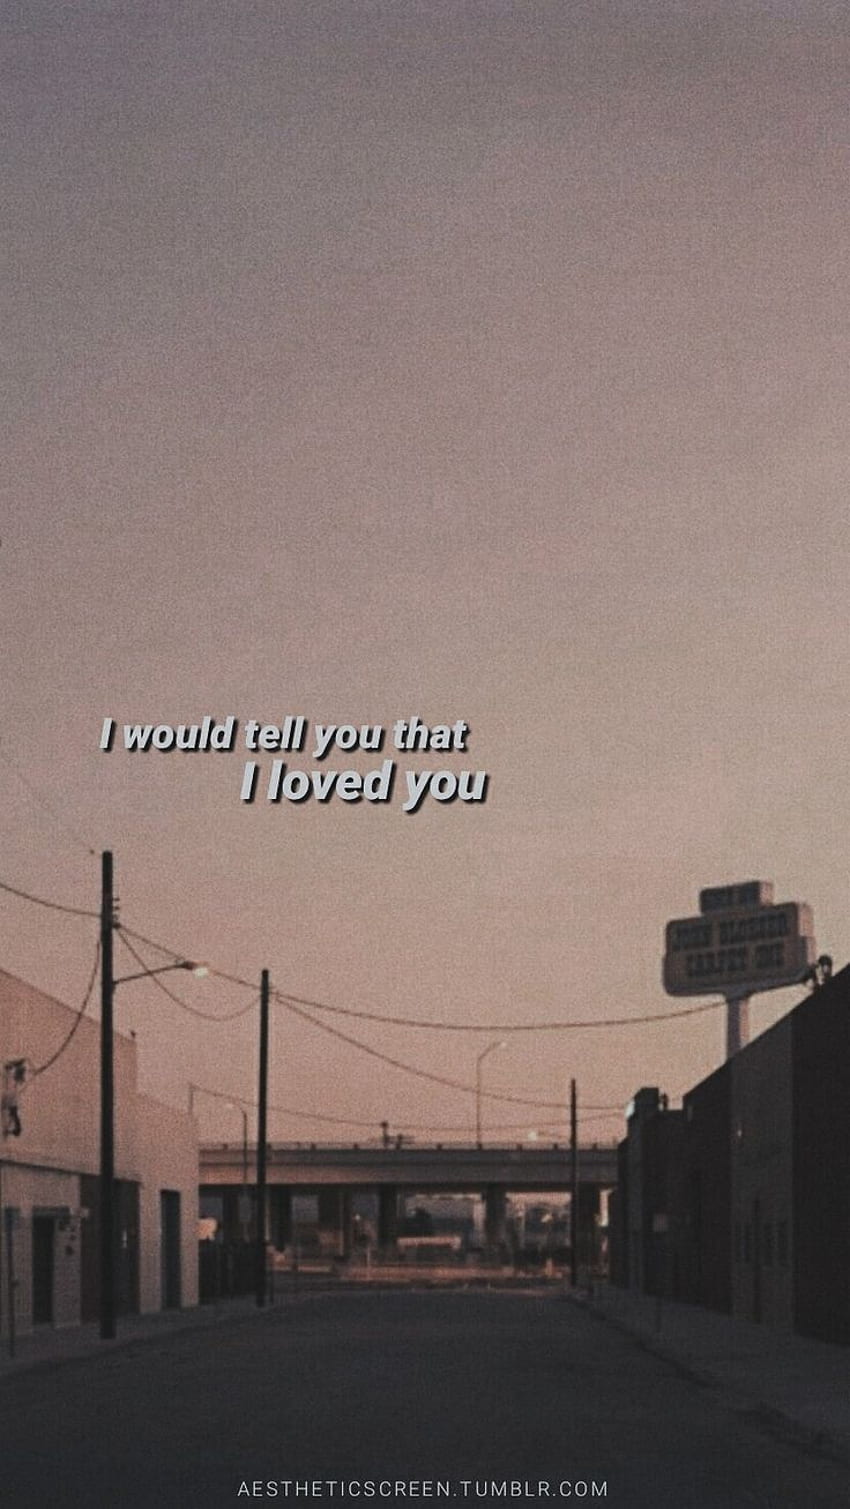 I would tell you that I loved you quotes , Phone tumblr, iphone love, Love Aesthetic Tumblr HD phone wallpaper